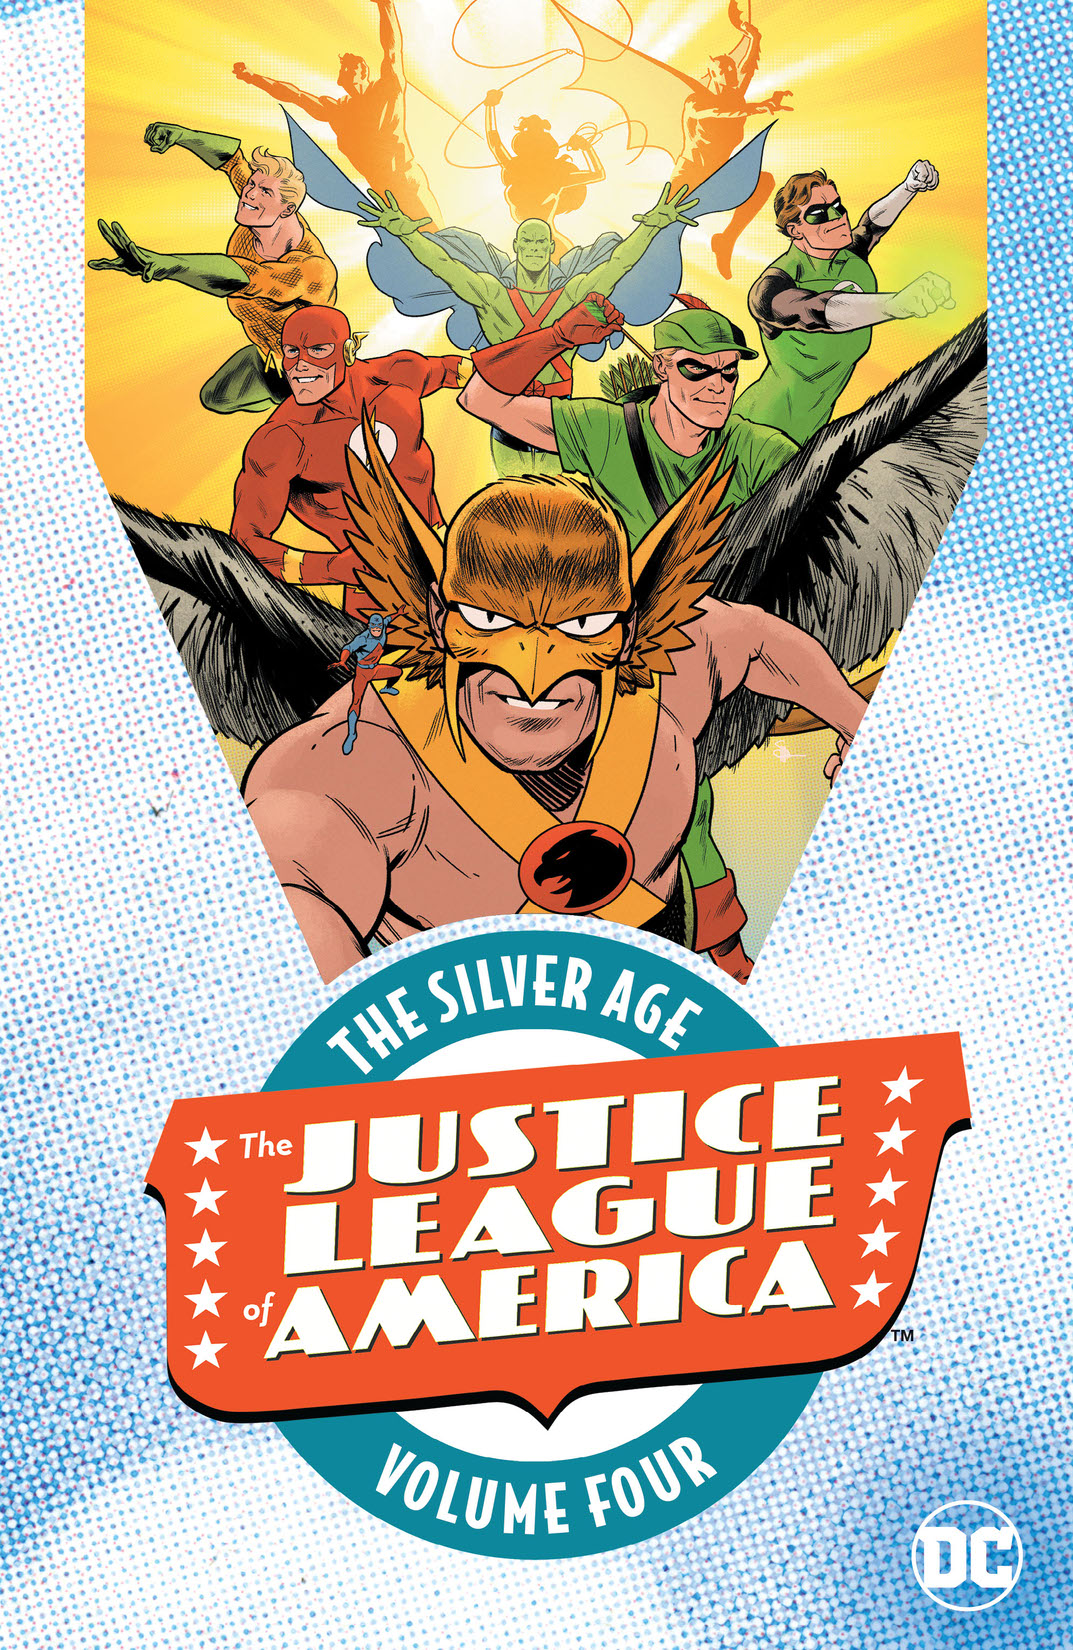 Justice League of America: The Silver Age Vol. 4 preview images